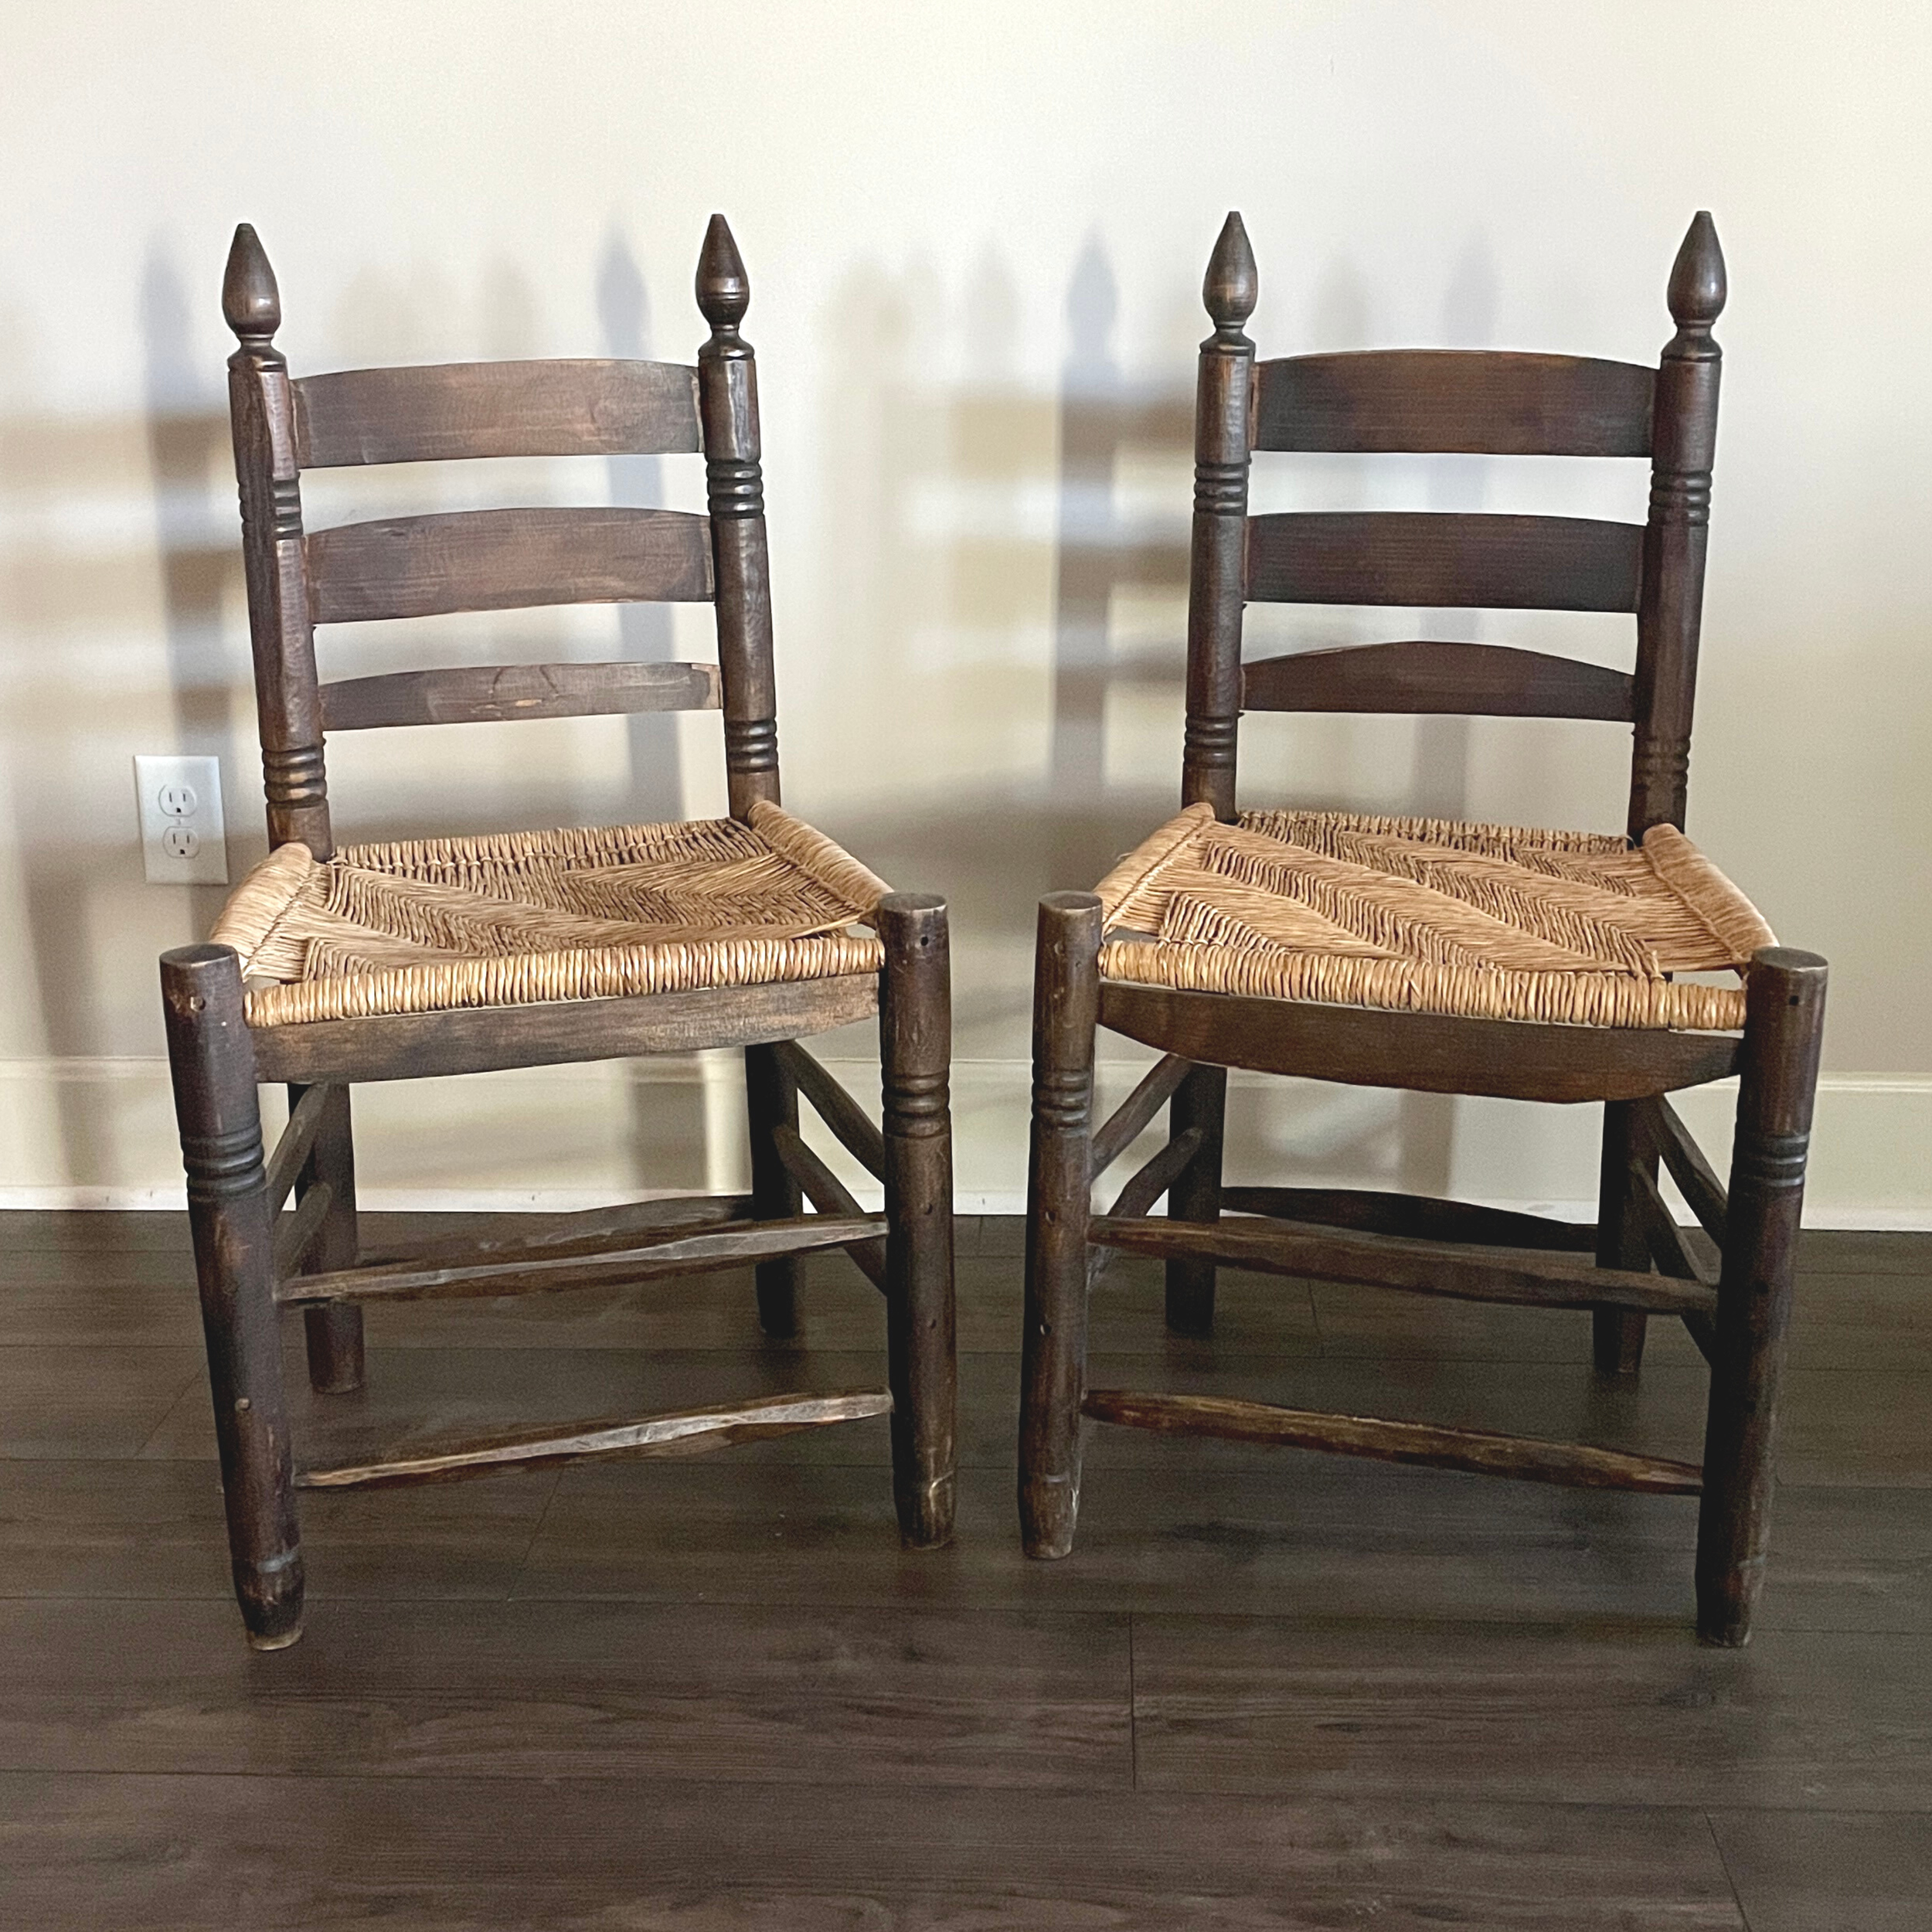 Ladder Back Chairs, a pair